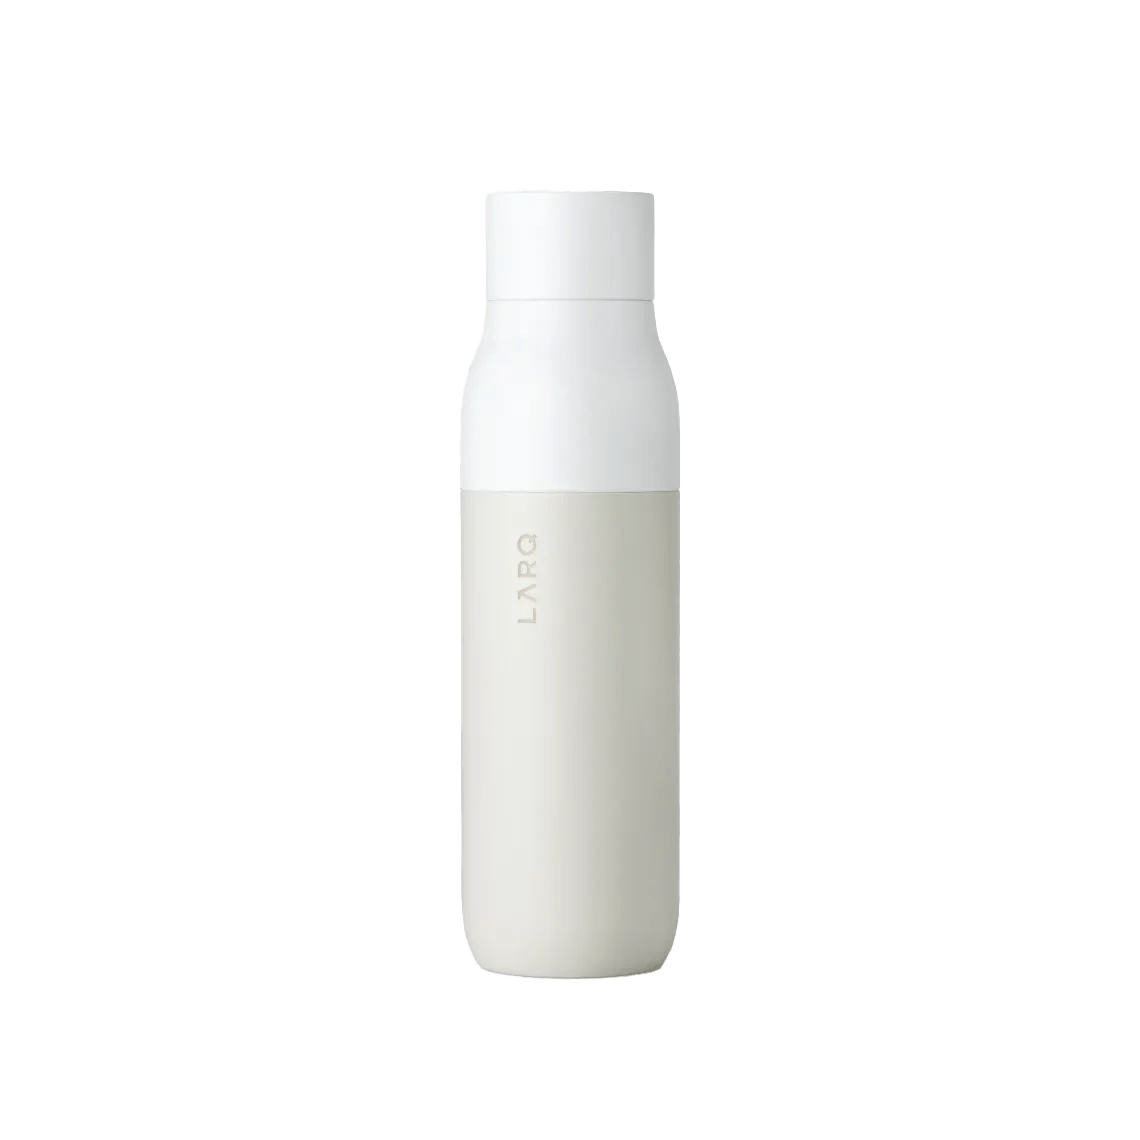 Customized 17 oz. Transparent Plastic Water Bottle with Carrying